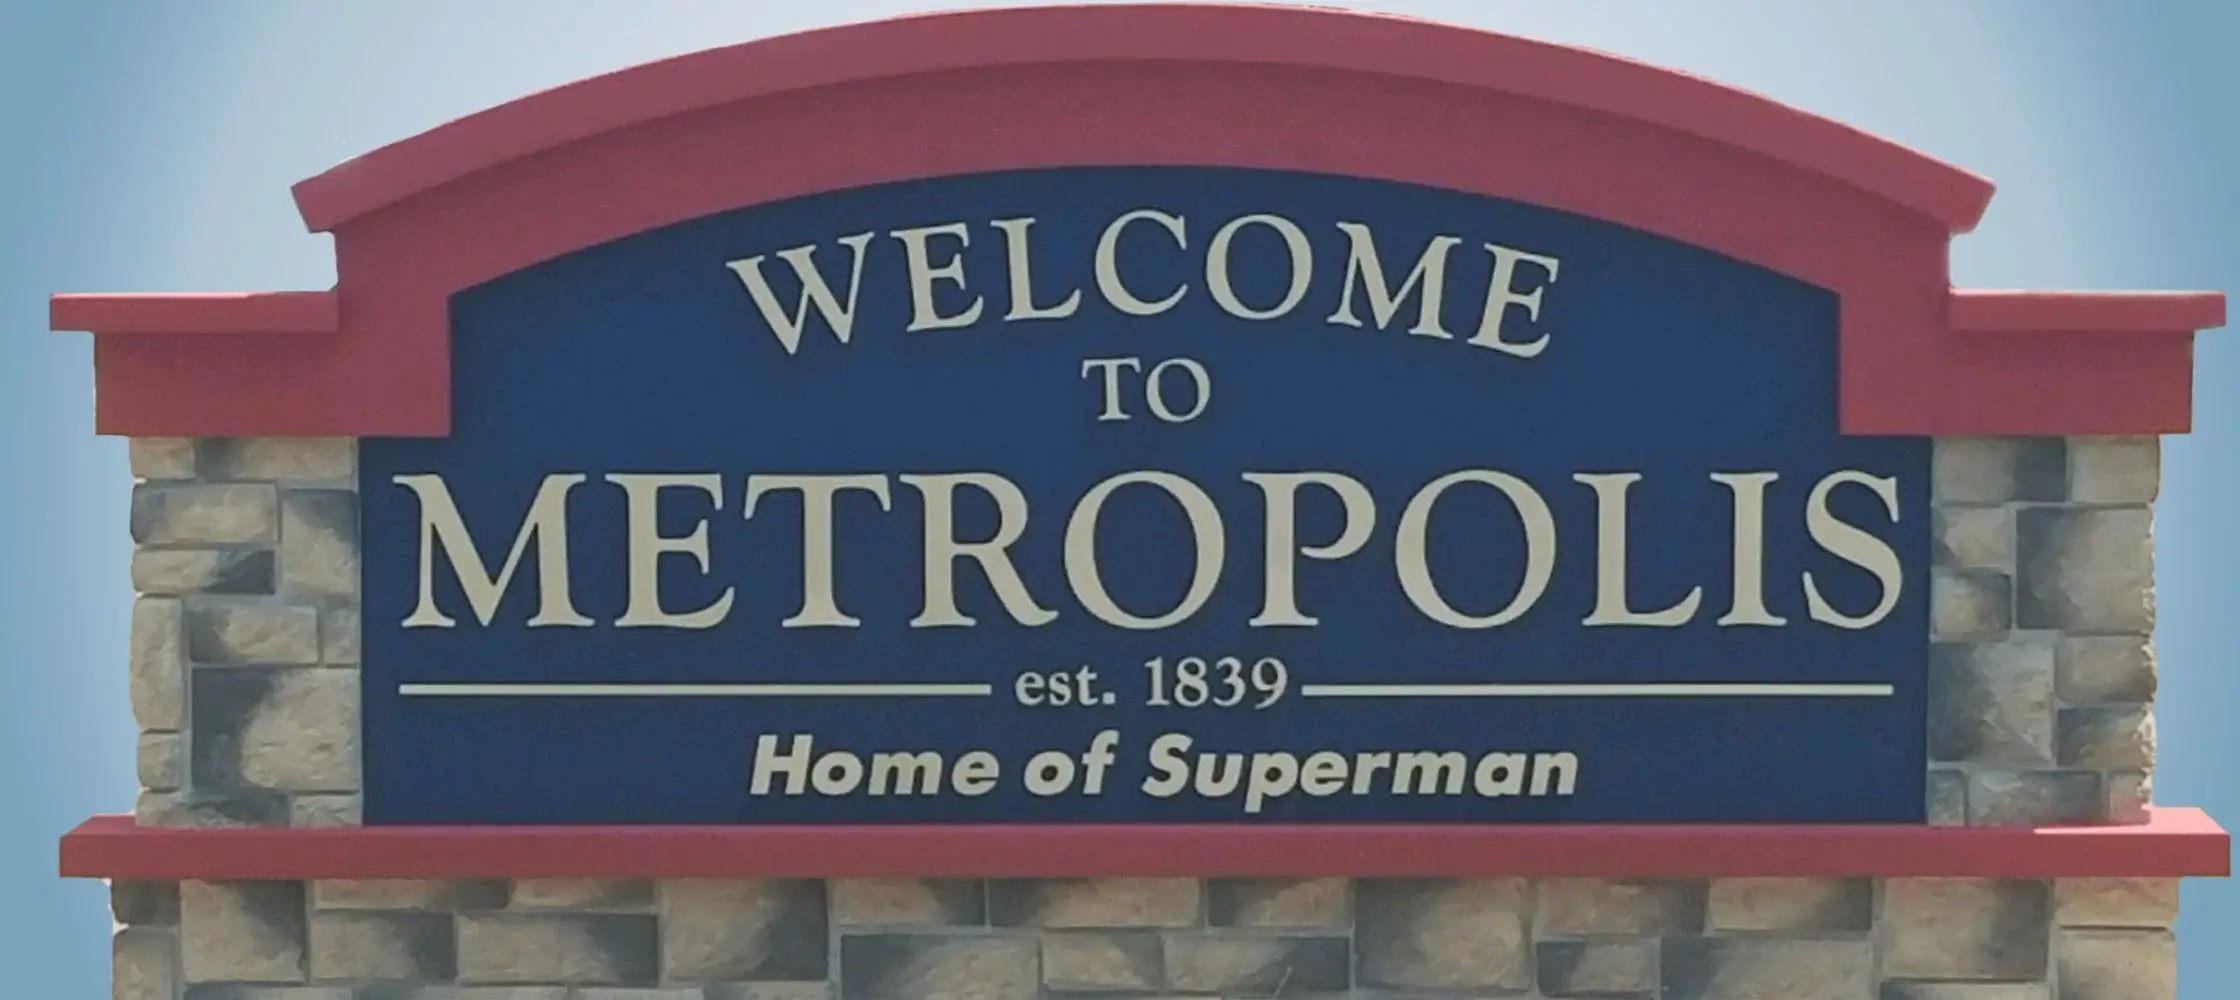 15 Things to Do in Metropolis, IL: Your Ultimate Guide